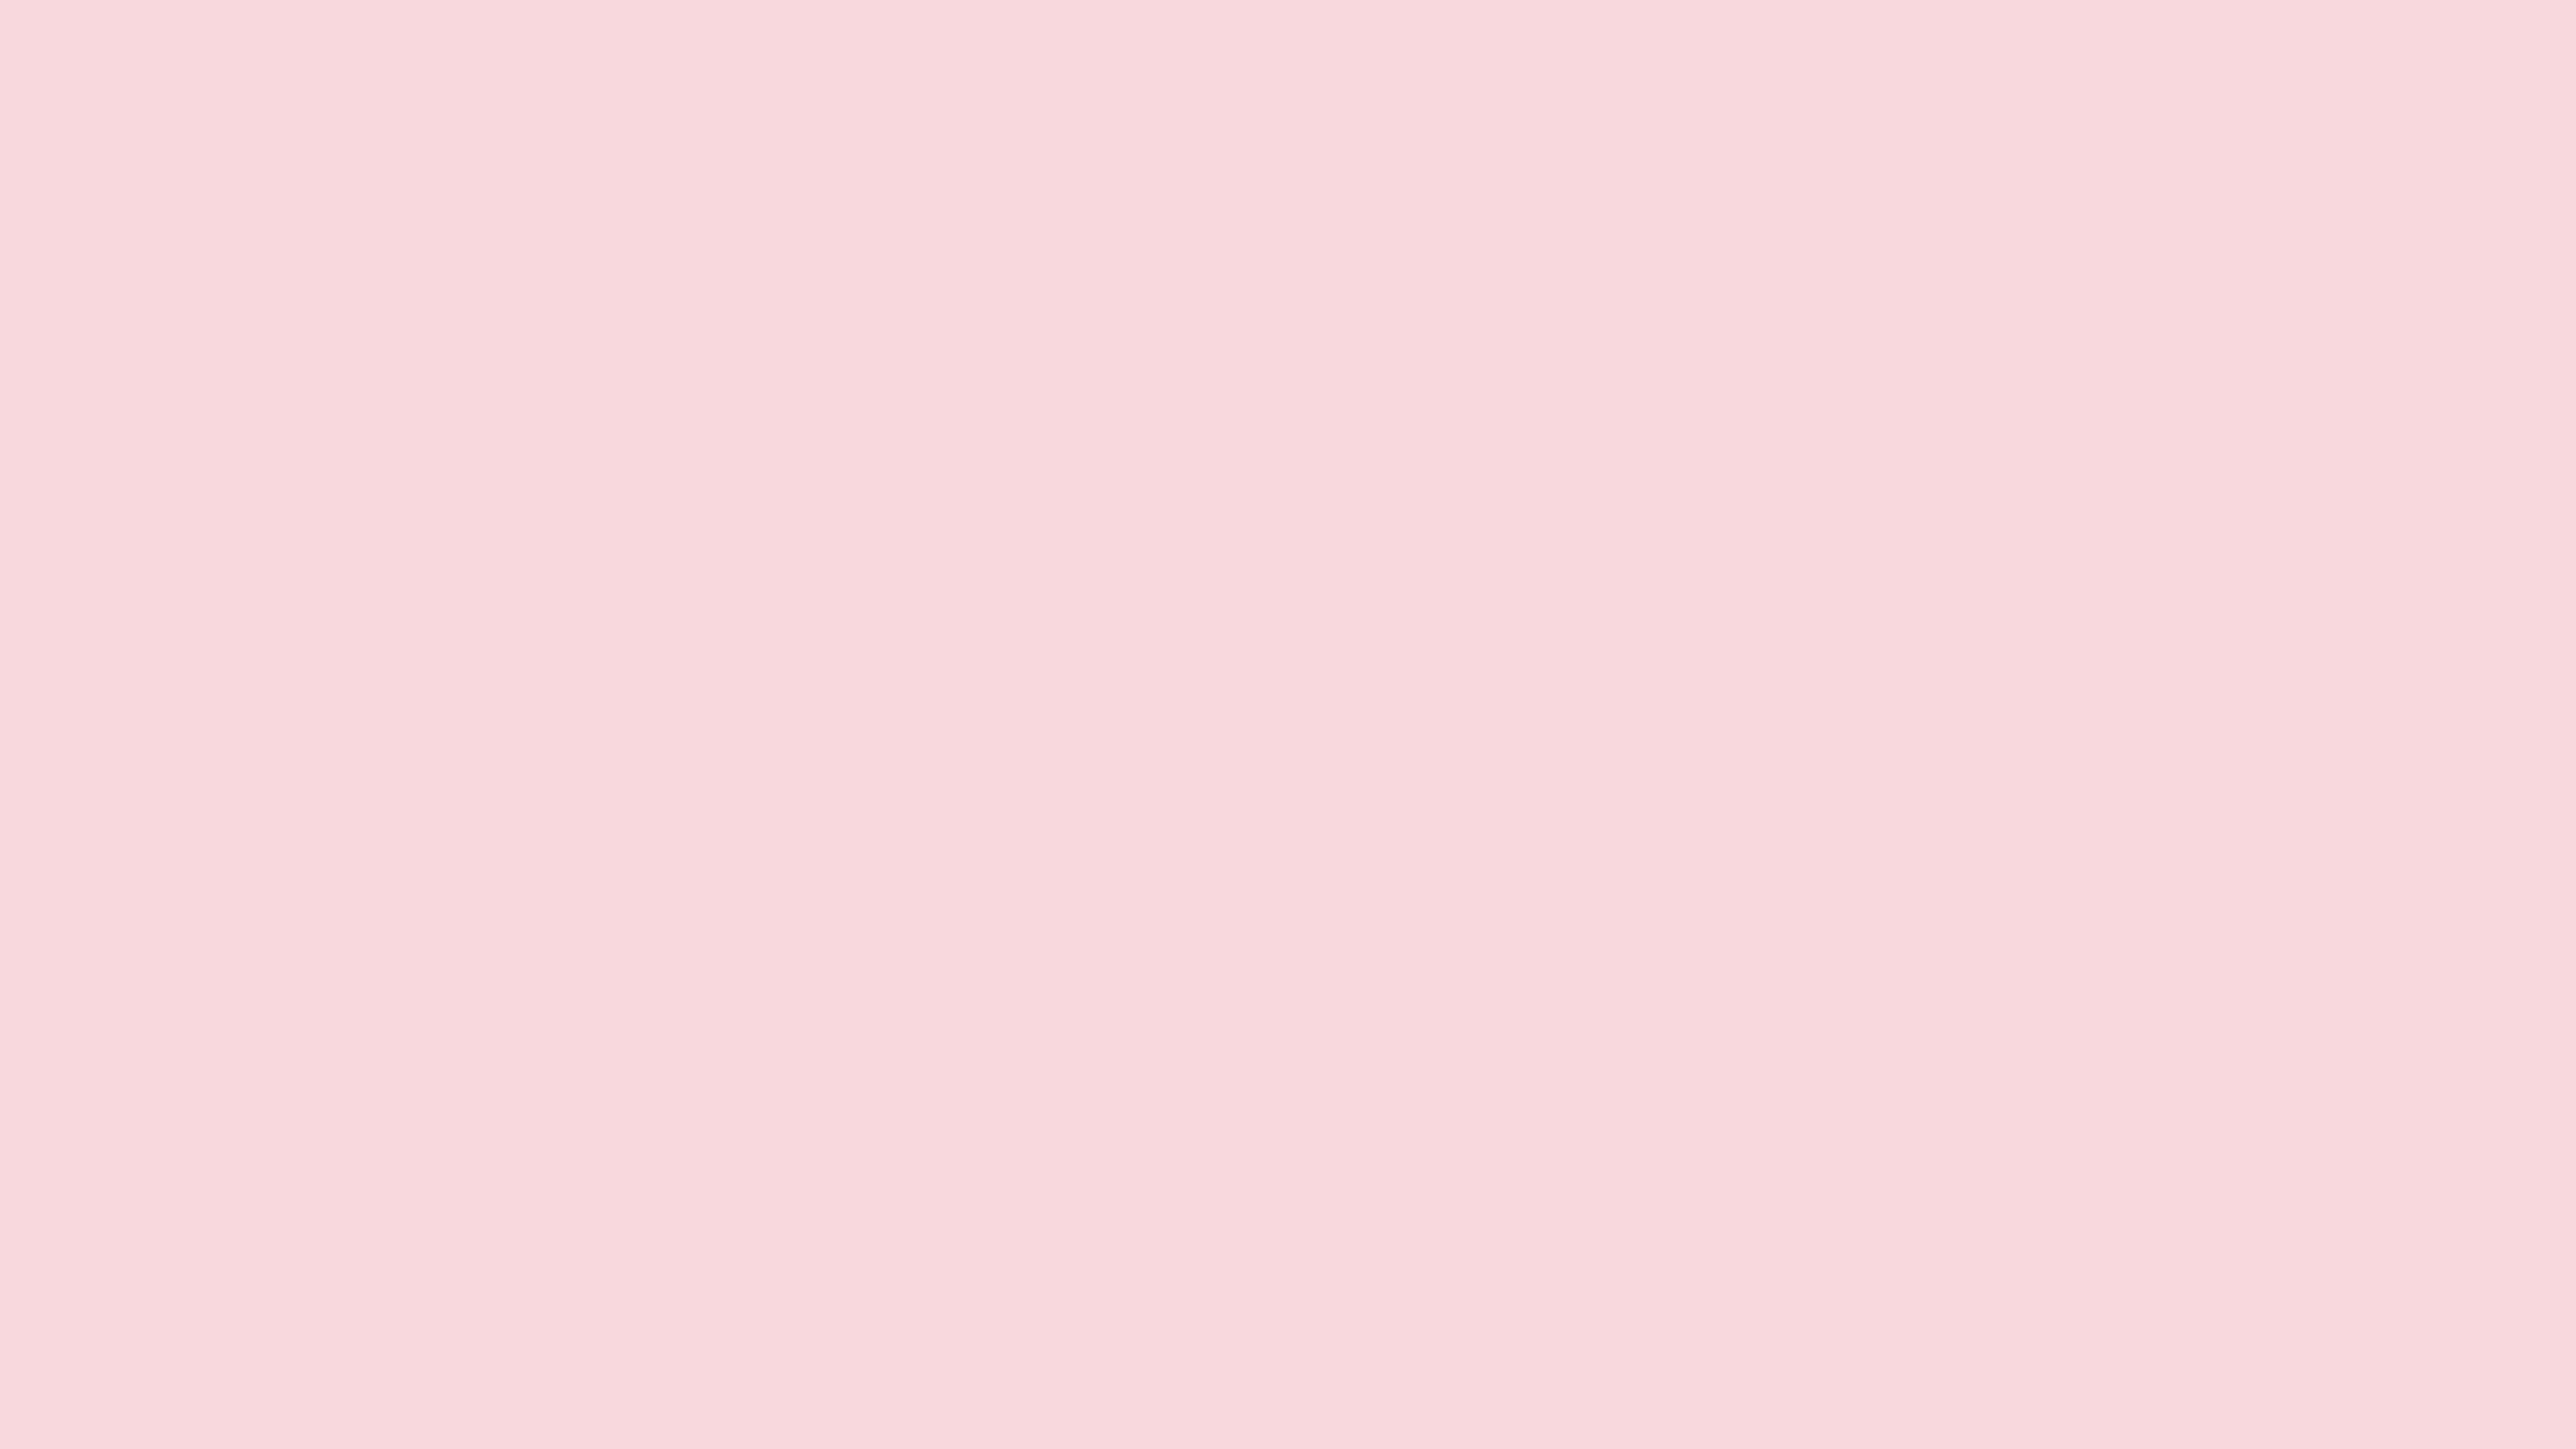 Barely Pink Solid Color Background Image | Free Image Generator